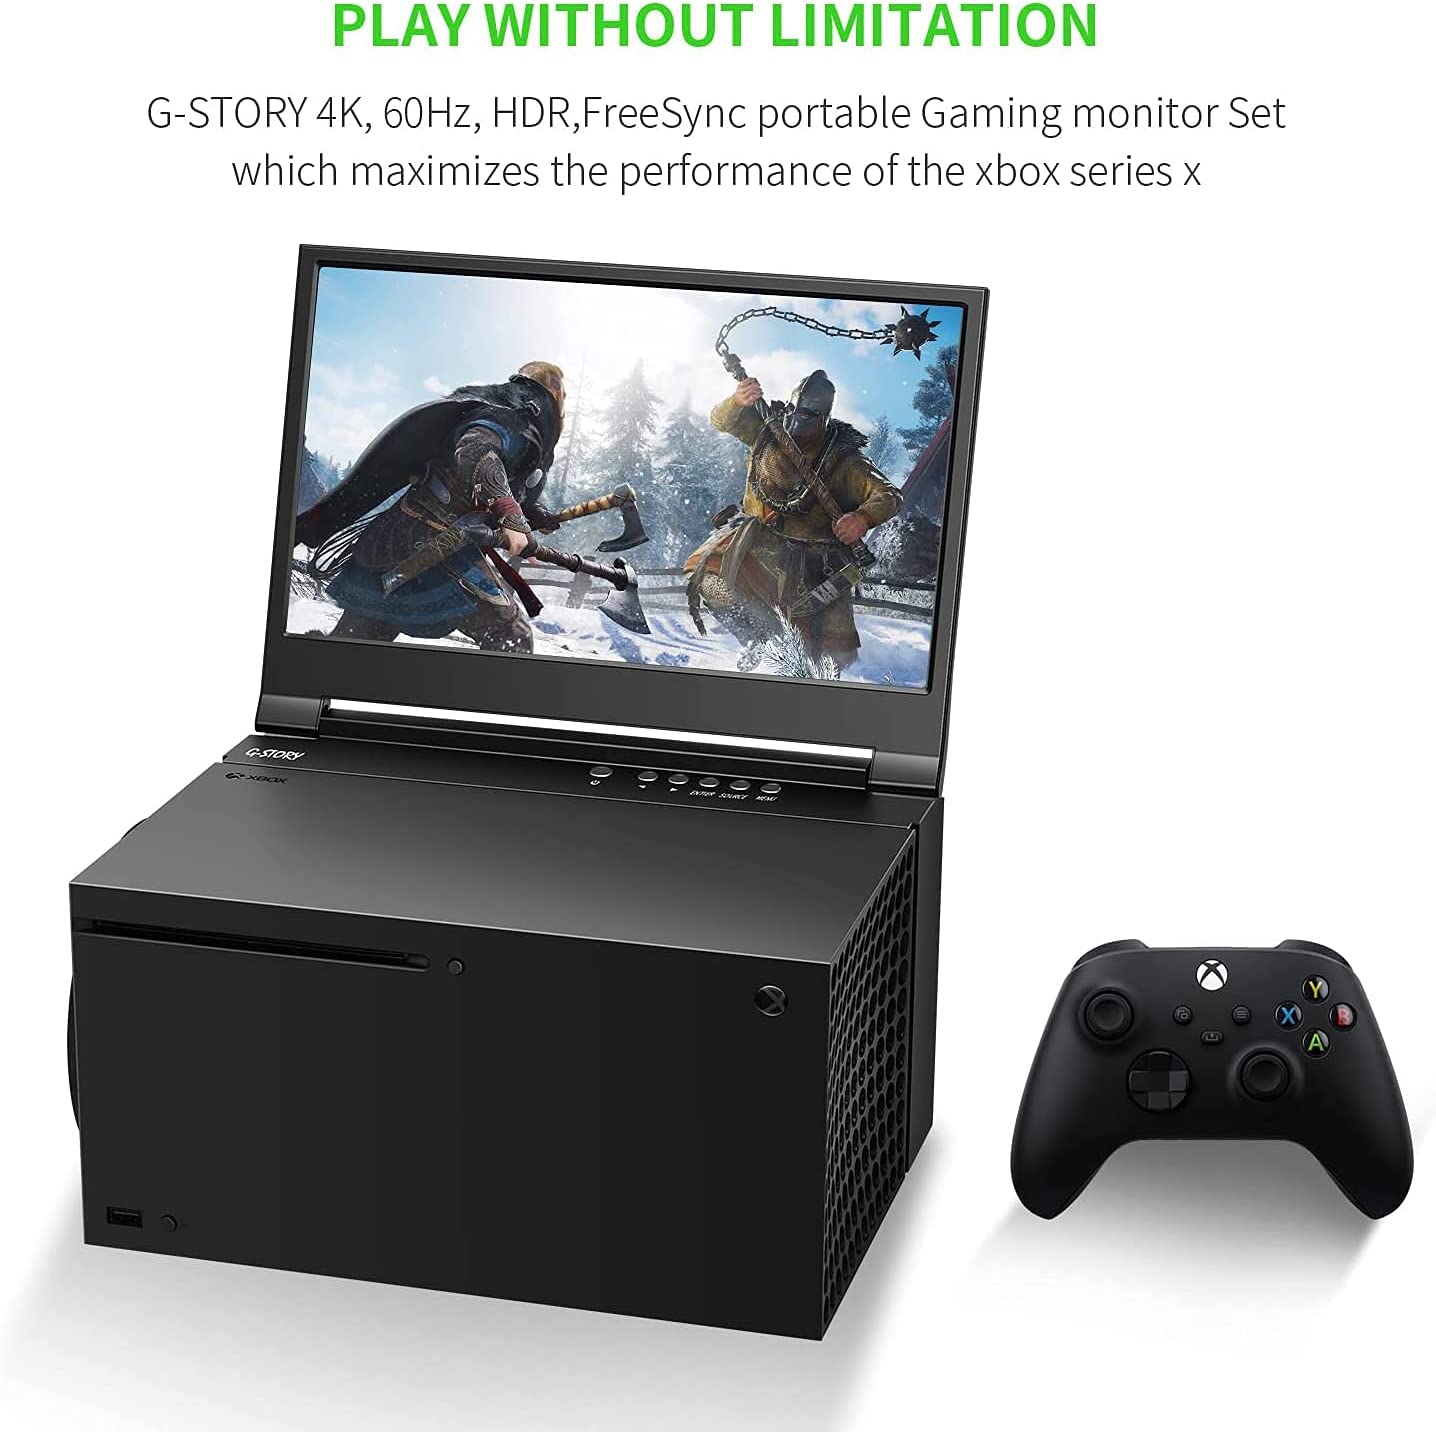 G-STORY 15.6 Portable Monitor for Xbox Series S 4K Portable Gaming Monitor  IPS Screen for Xbox Series S（not Included） with Two HDMI, HDR, Freesync